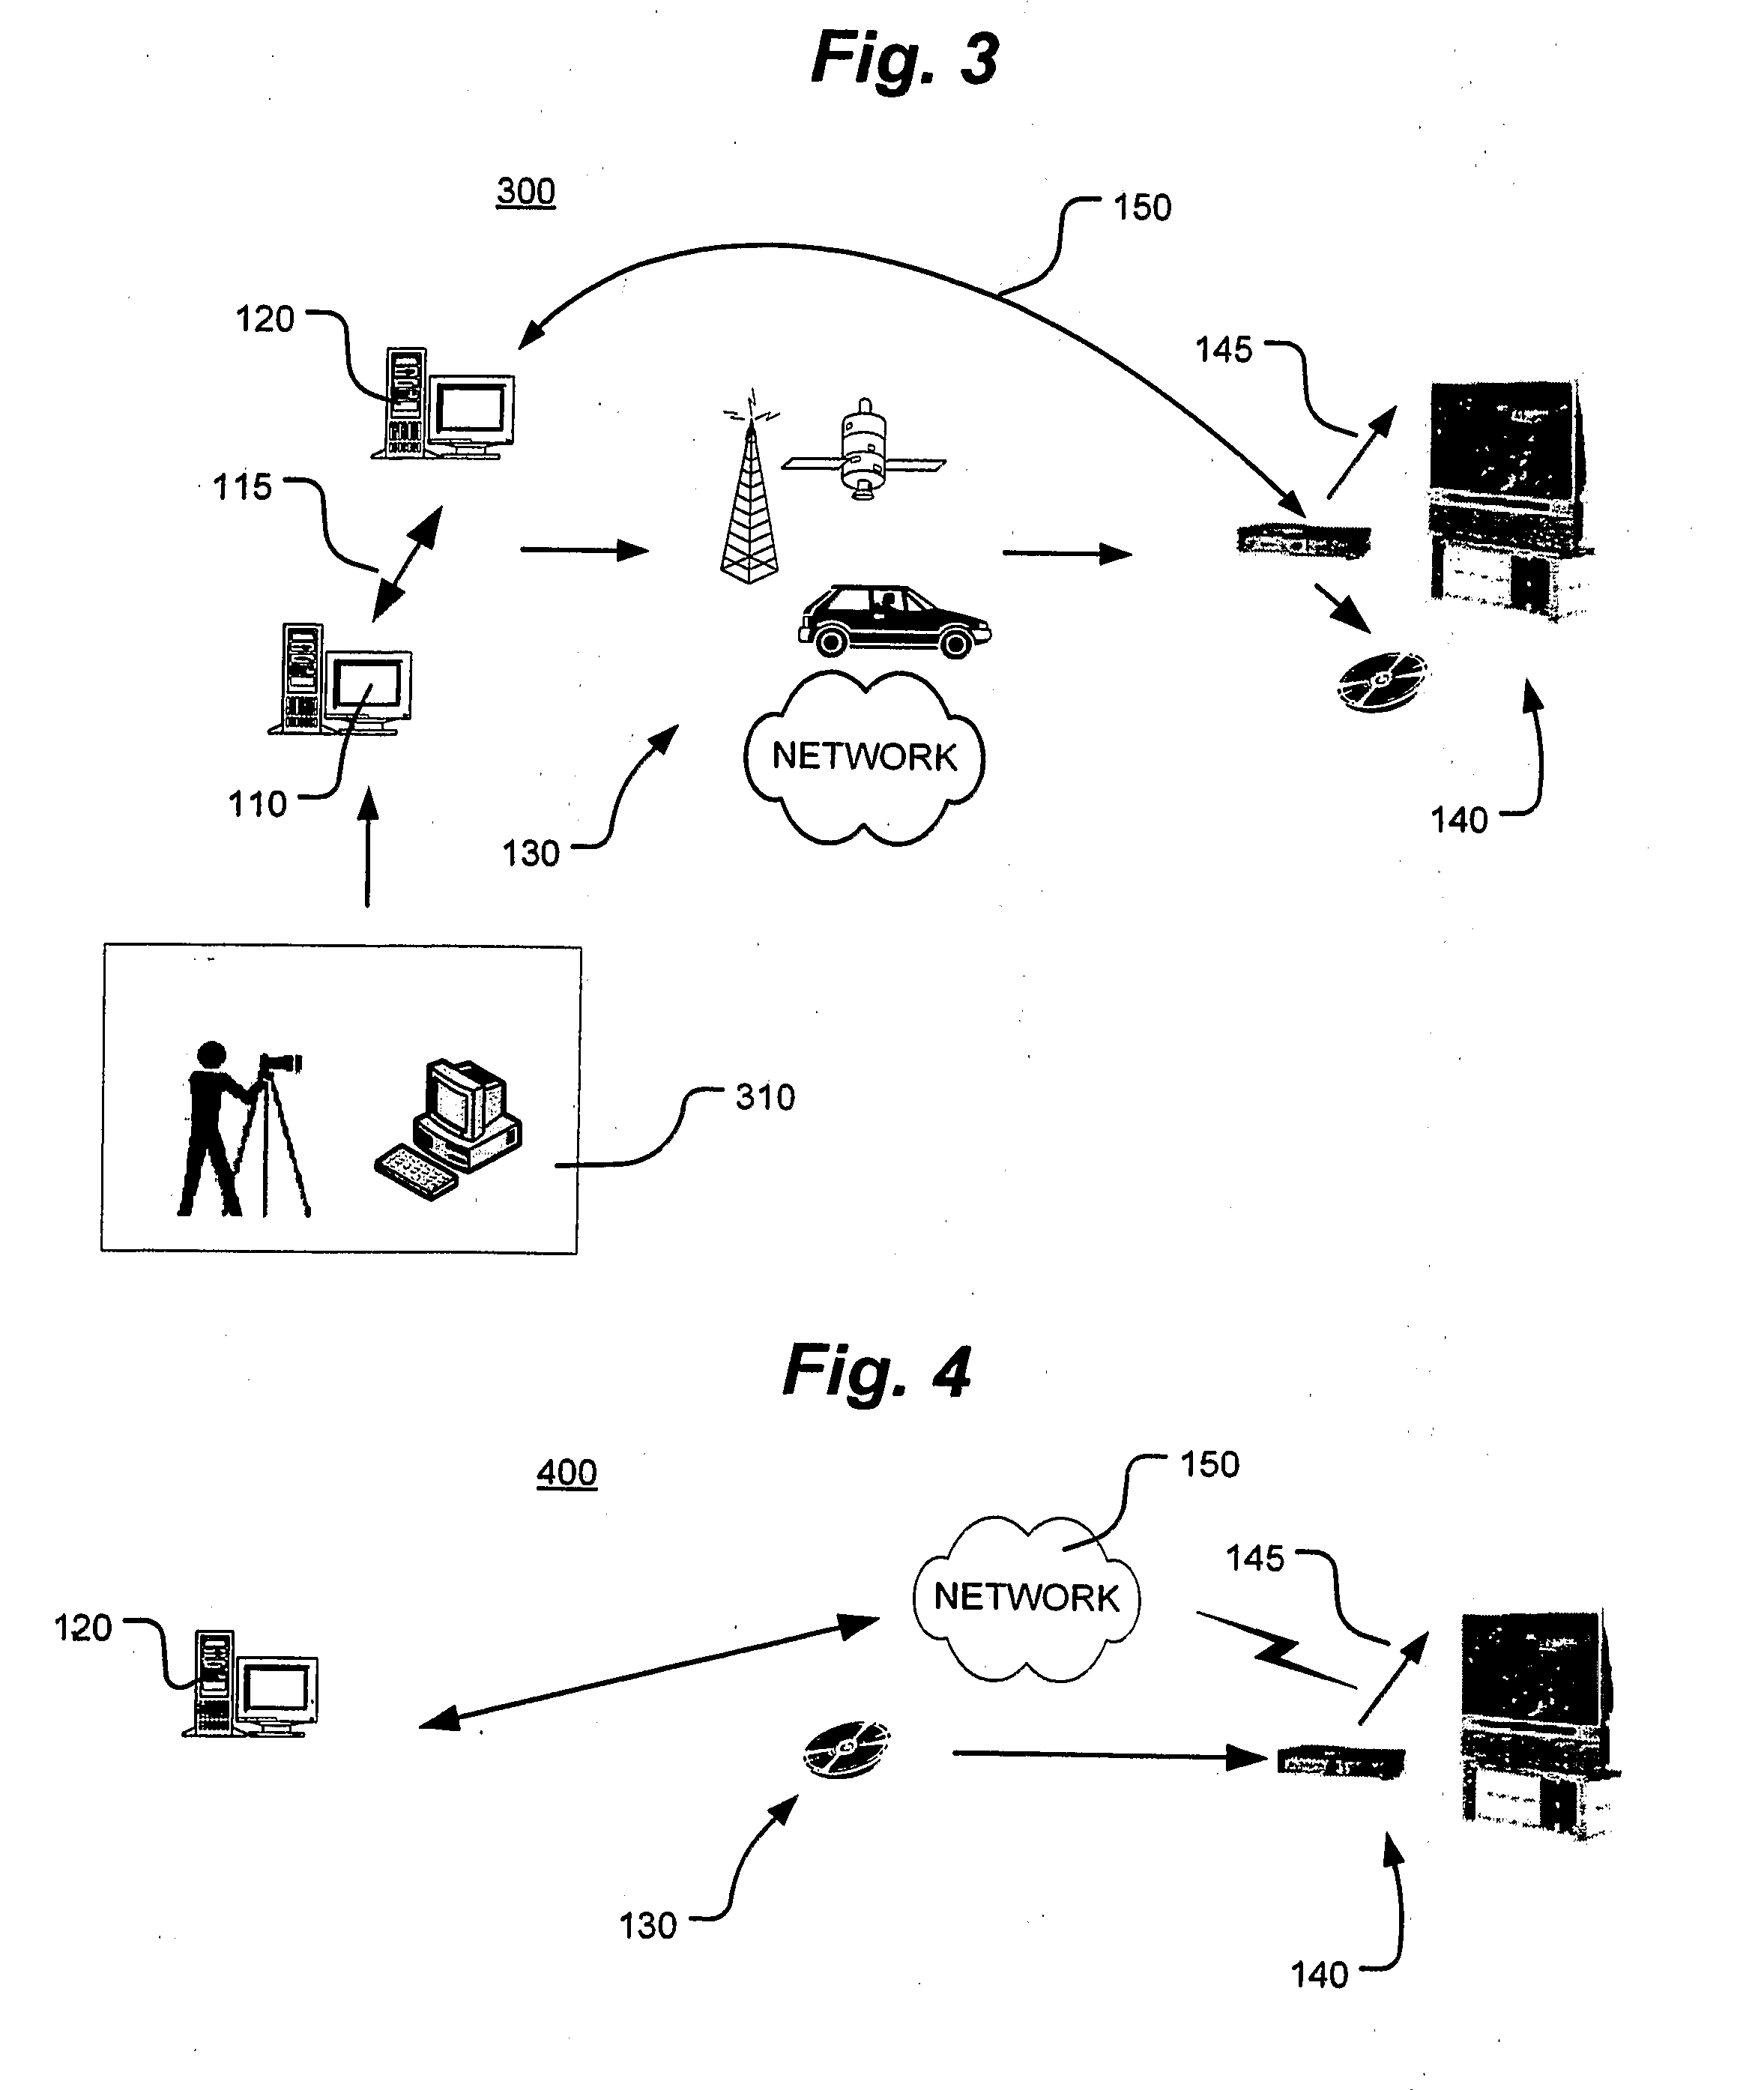 Method And System For Selectively Providing Access To Content